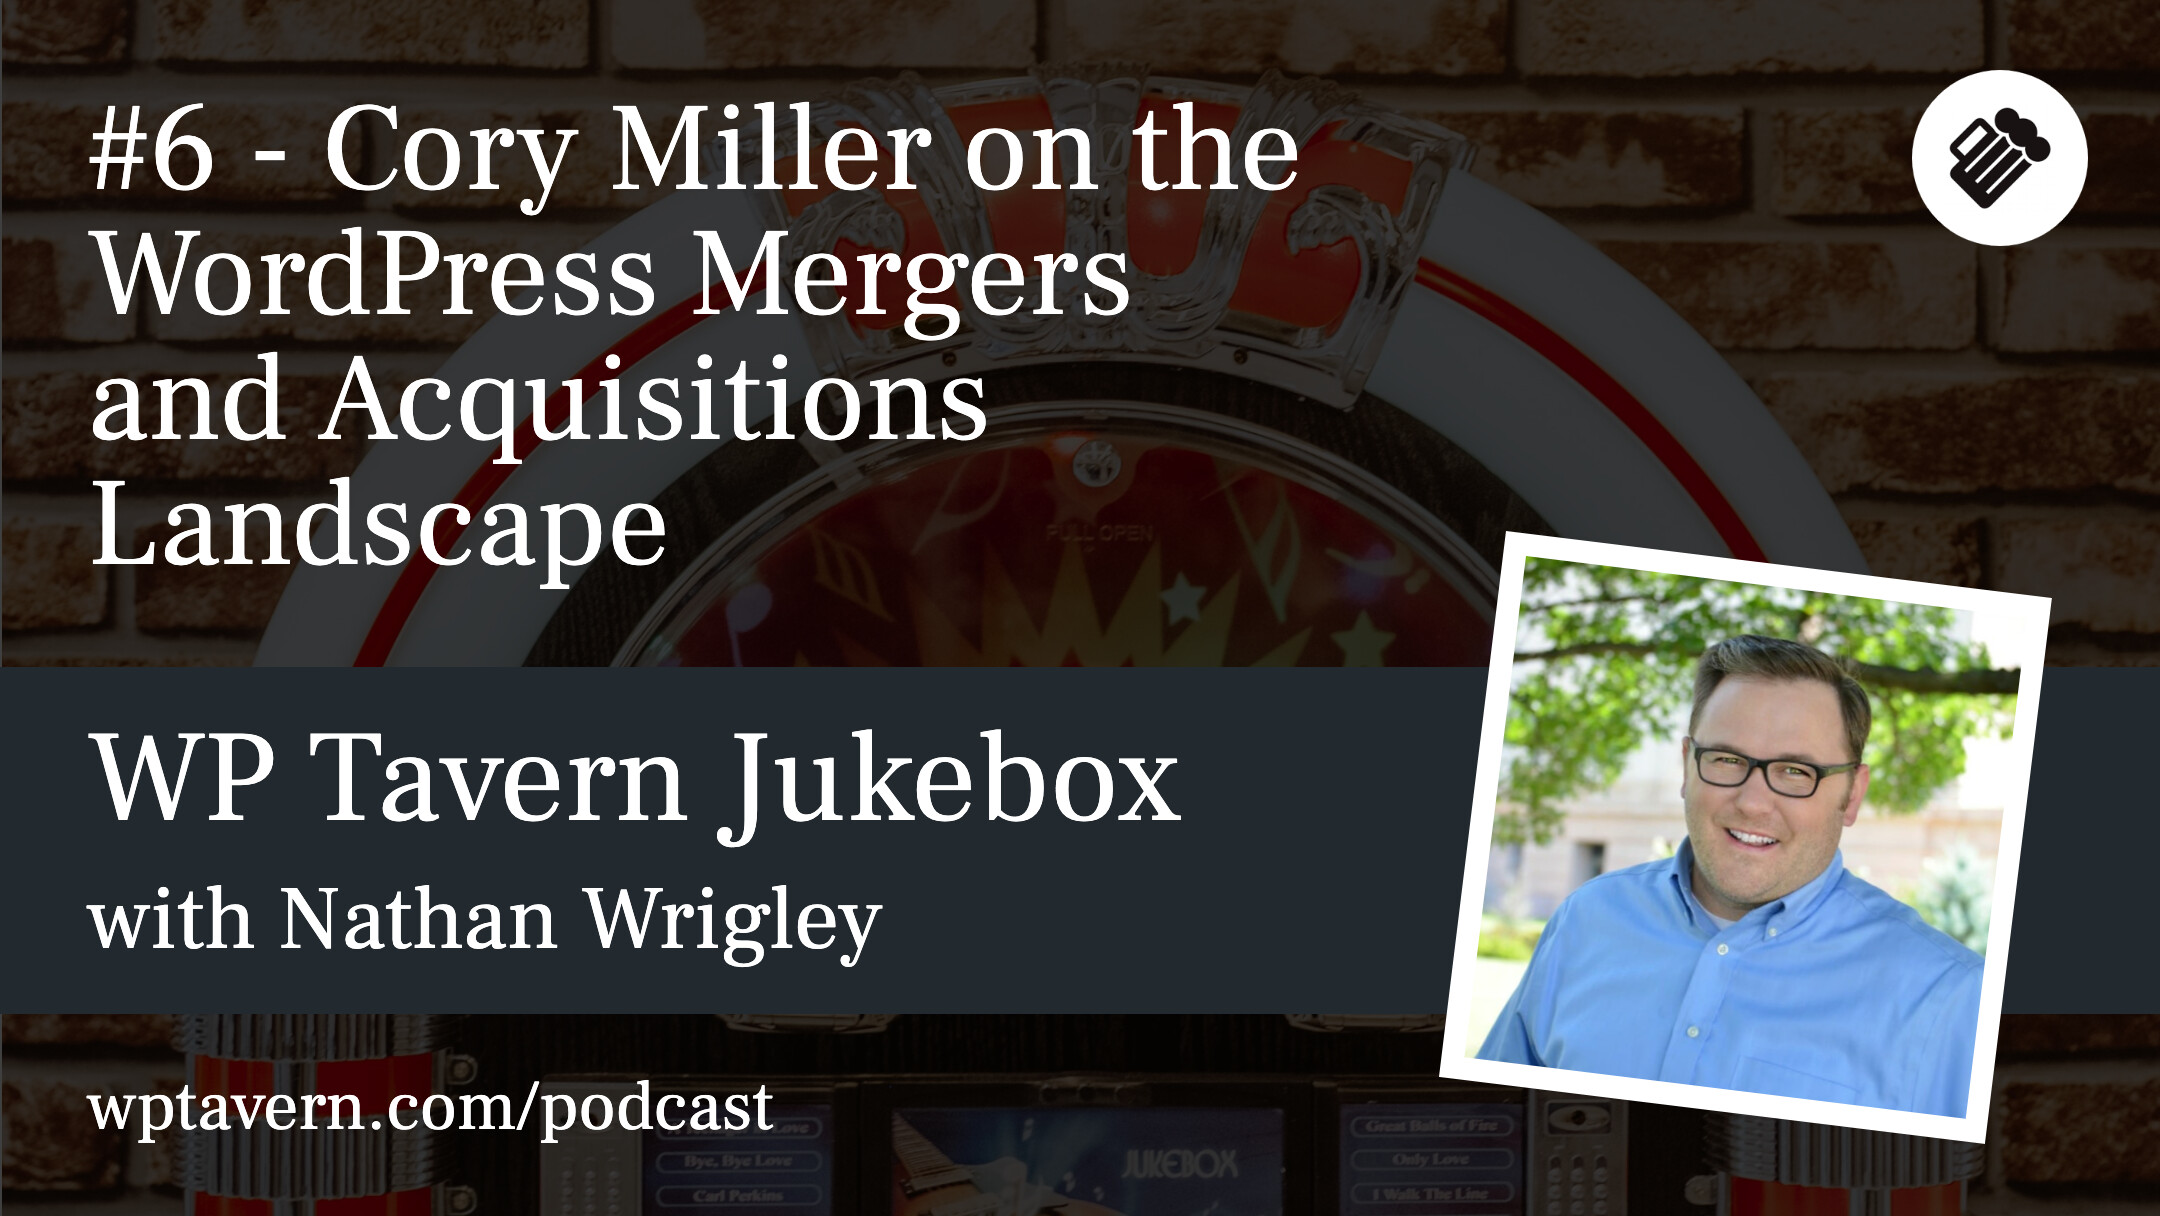 #6 - Cory Miller on the WordPress Mergers and Acquisitions Landscape